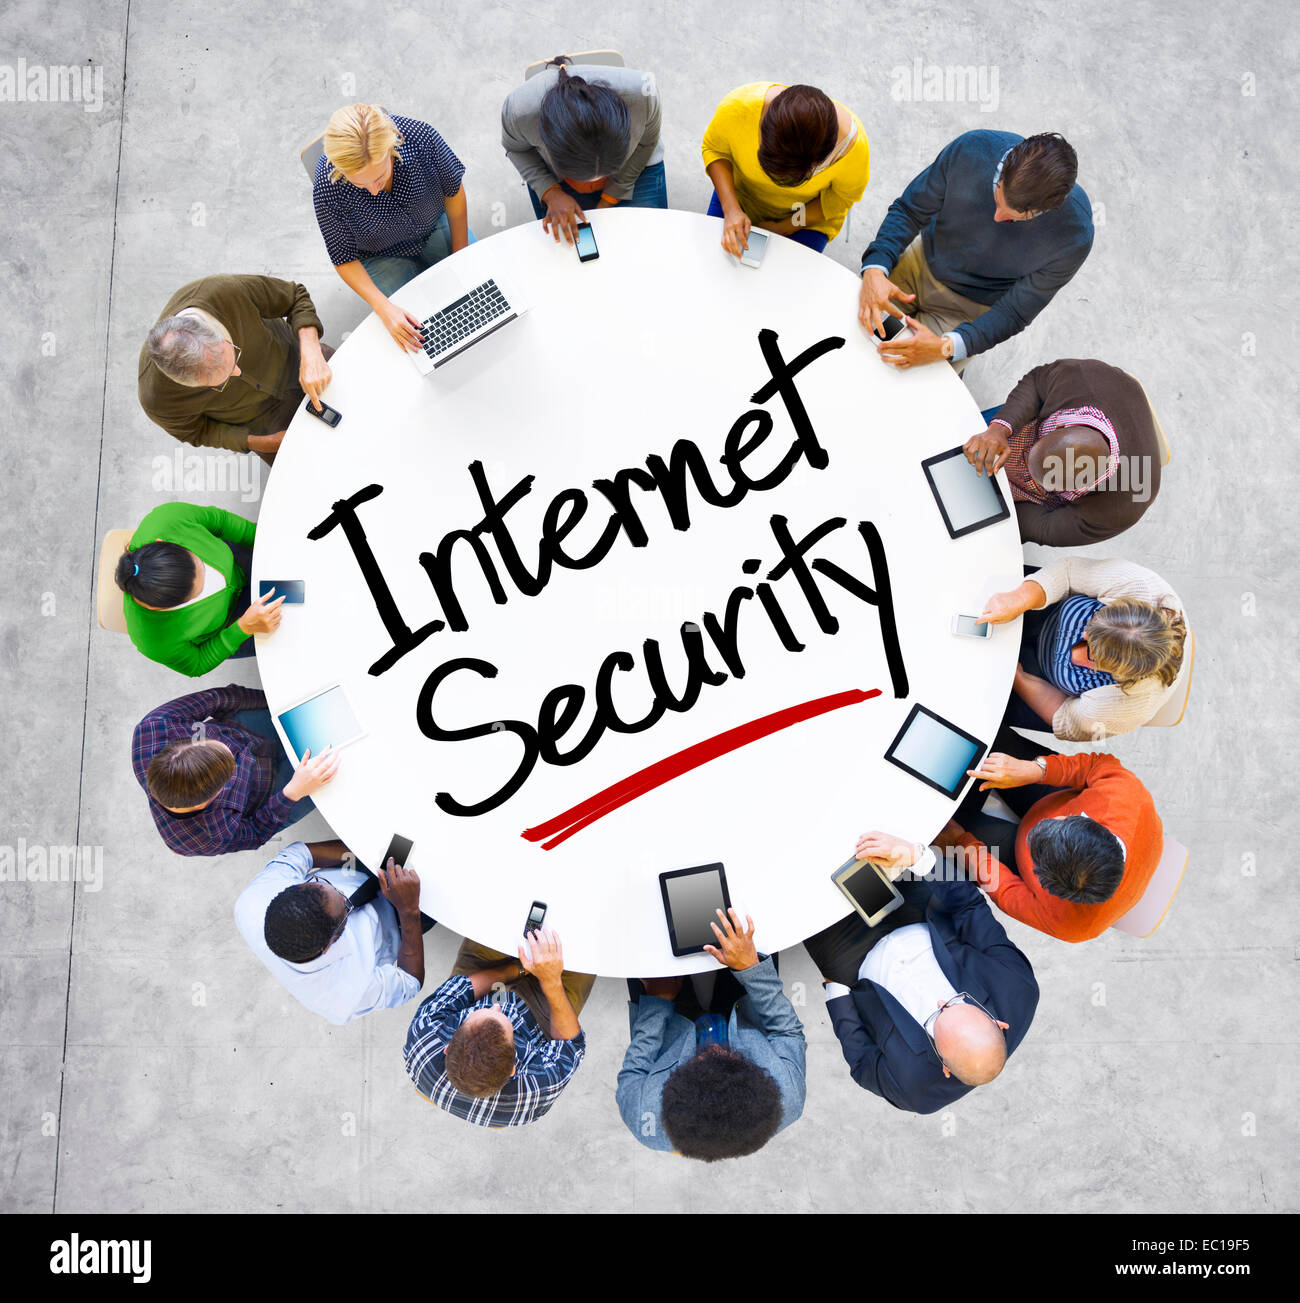 People and Internet Security Concept with Textured Effect Stock Photo